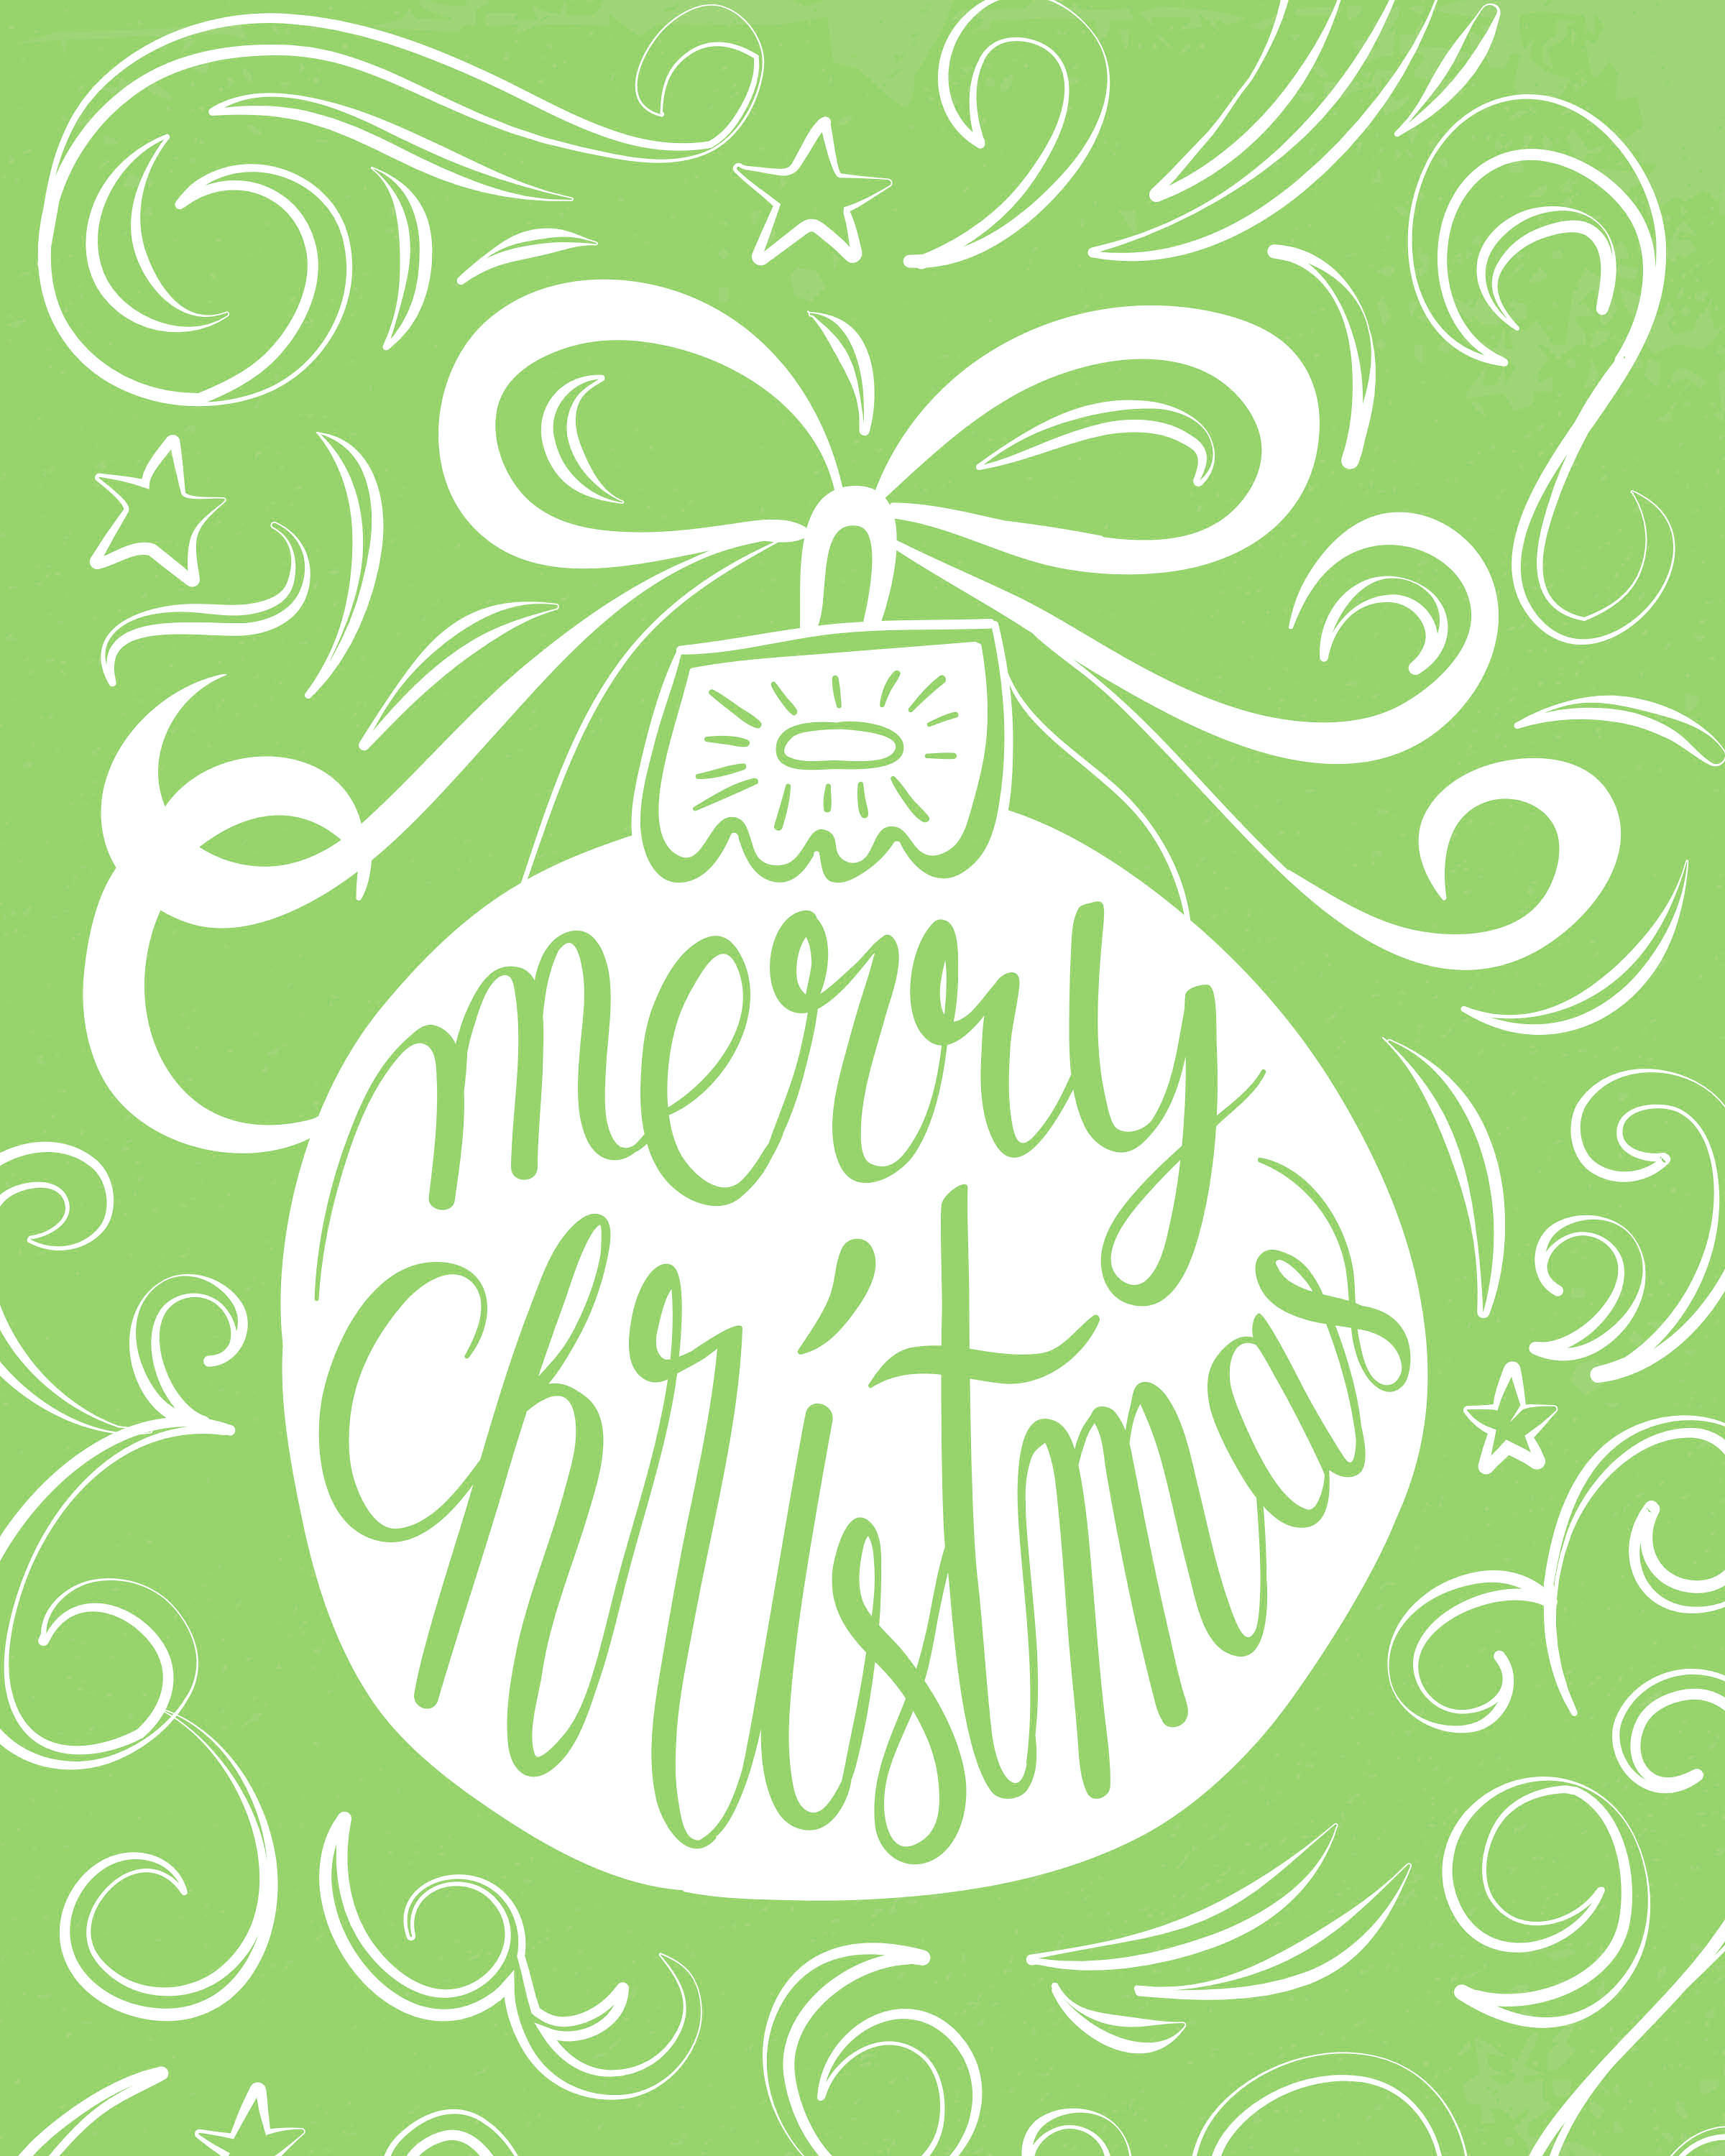 merry-christmas-paper-template-royalty-free-vector-image